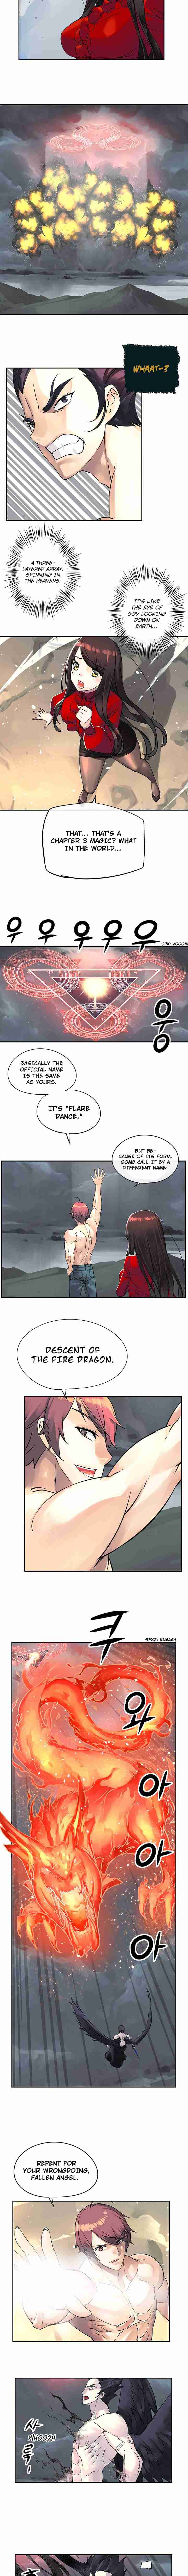 The God of "Game of God" Ch. 17